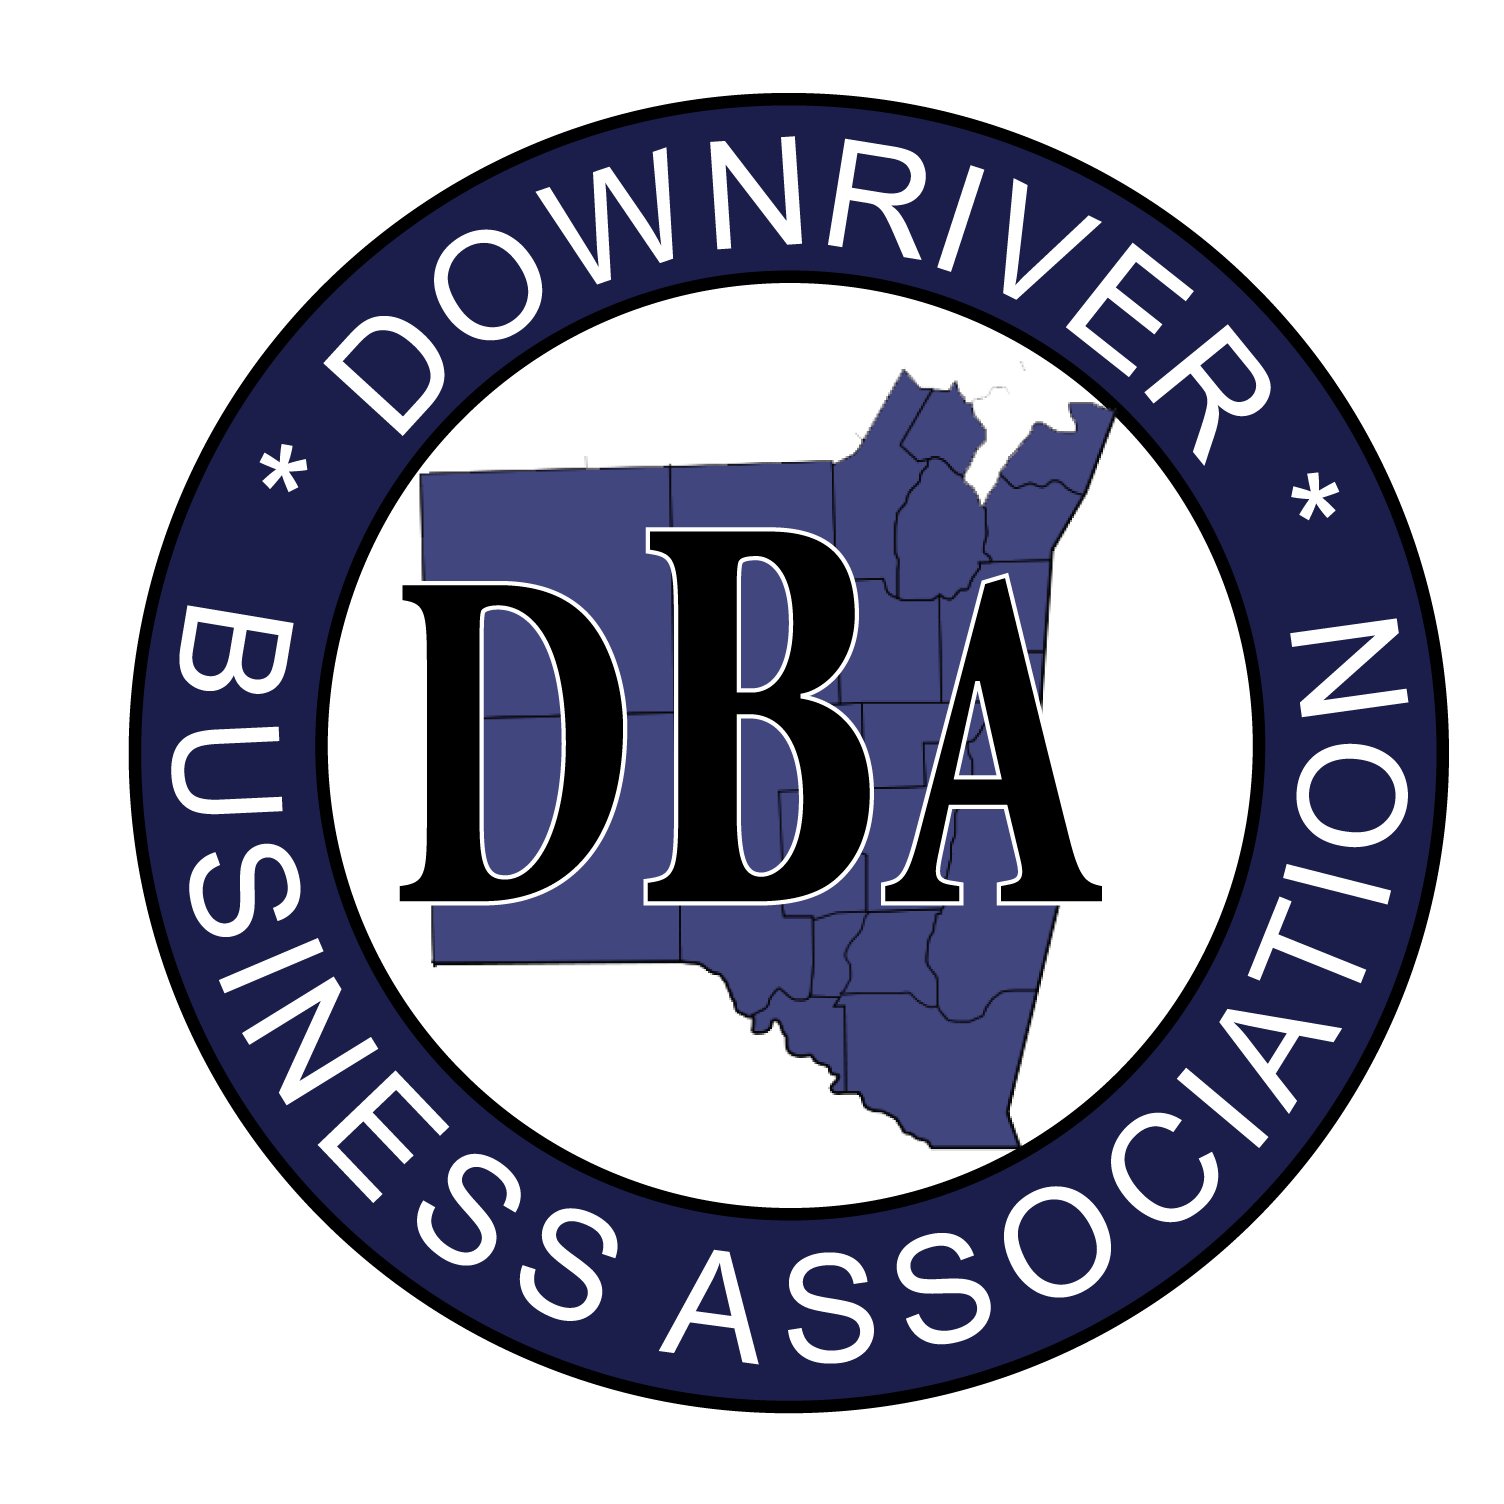 Welcome to the Downriver Business Association. Our goal is to support local businesses, network with one another and give back to the community.